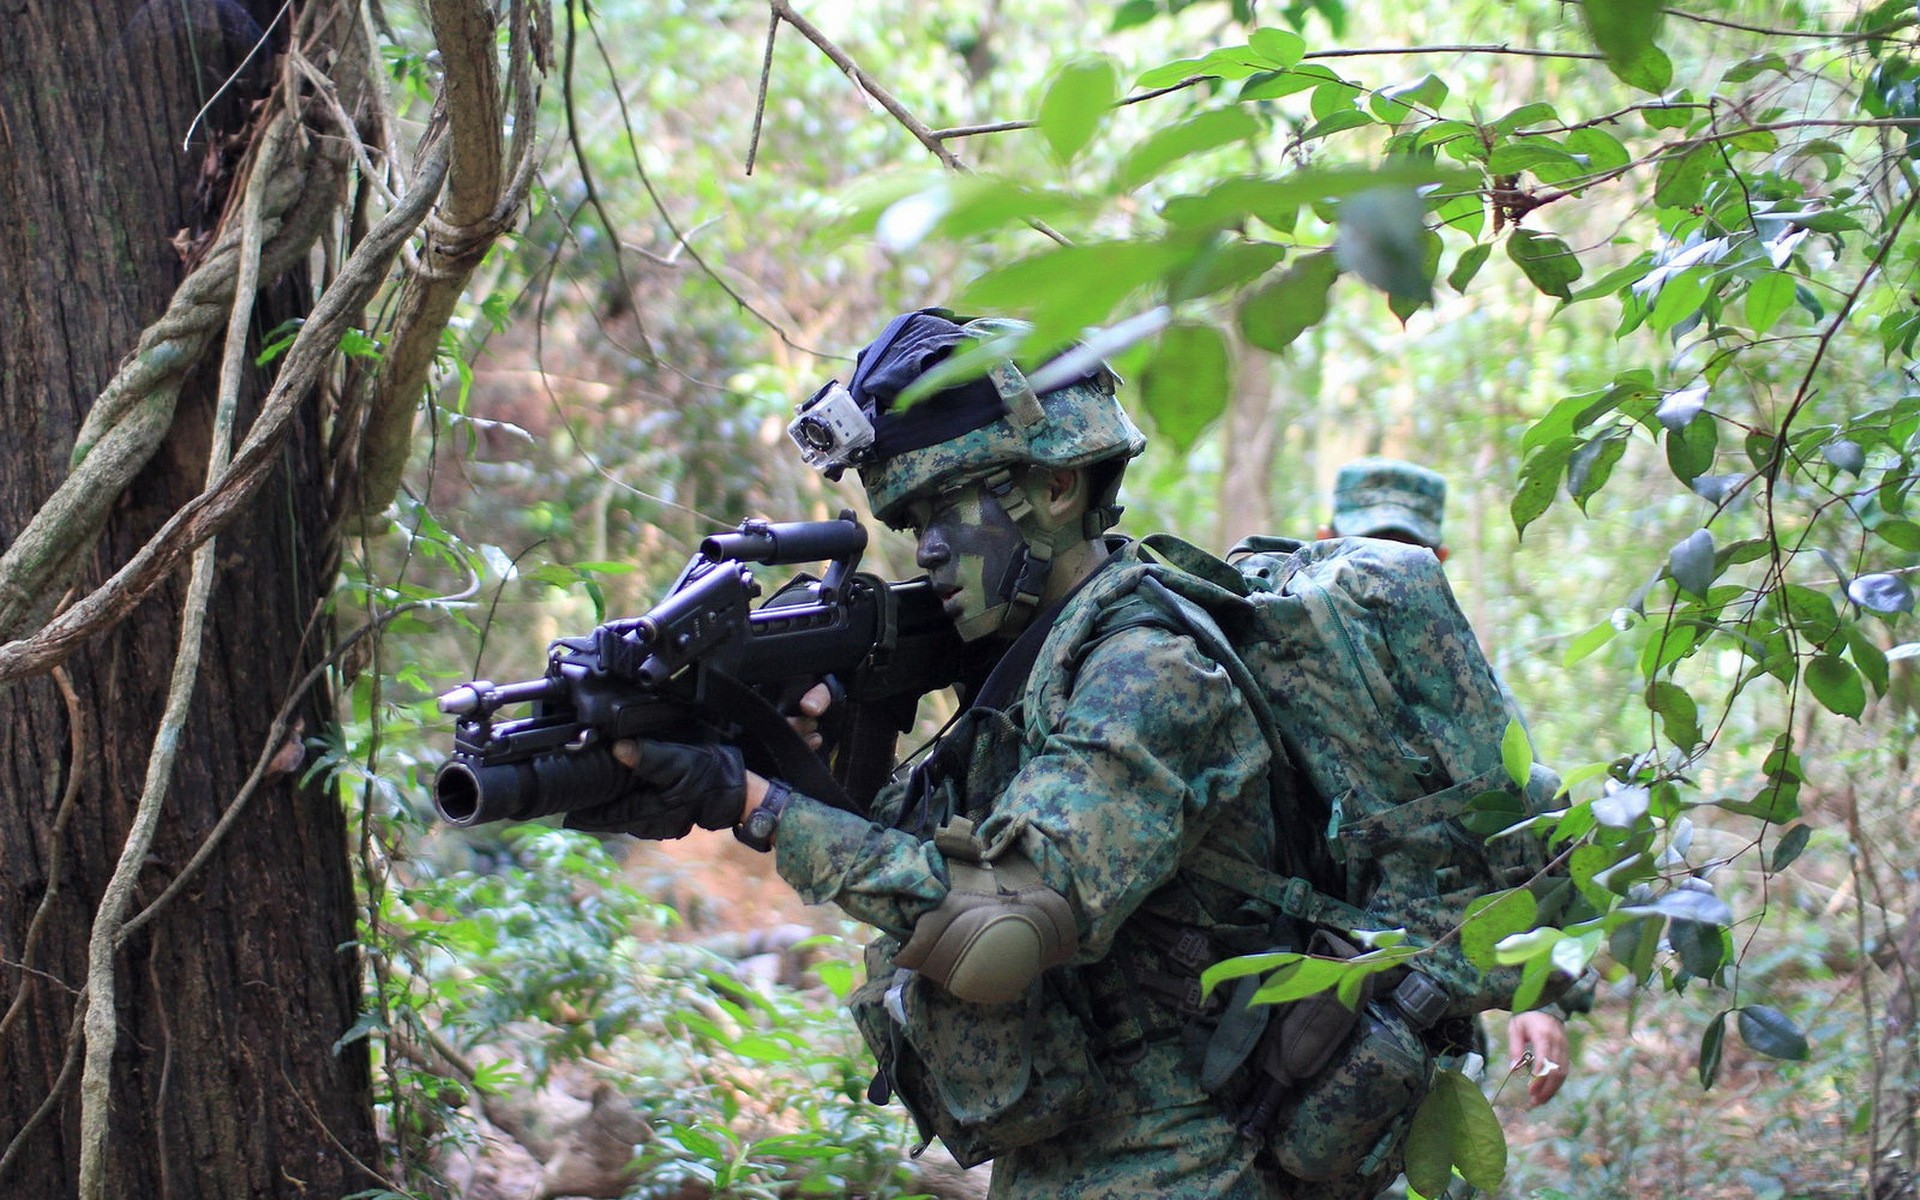 soldier, SAR Army Gear, Weapon, Assault Rifle, Singapore, Grenade Launchers, Forest, Camouflage, Military, Military Training Wallpaper HD / Desktop and Mobile Background